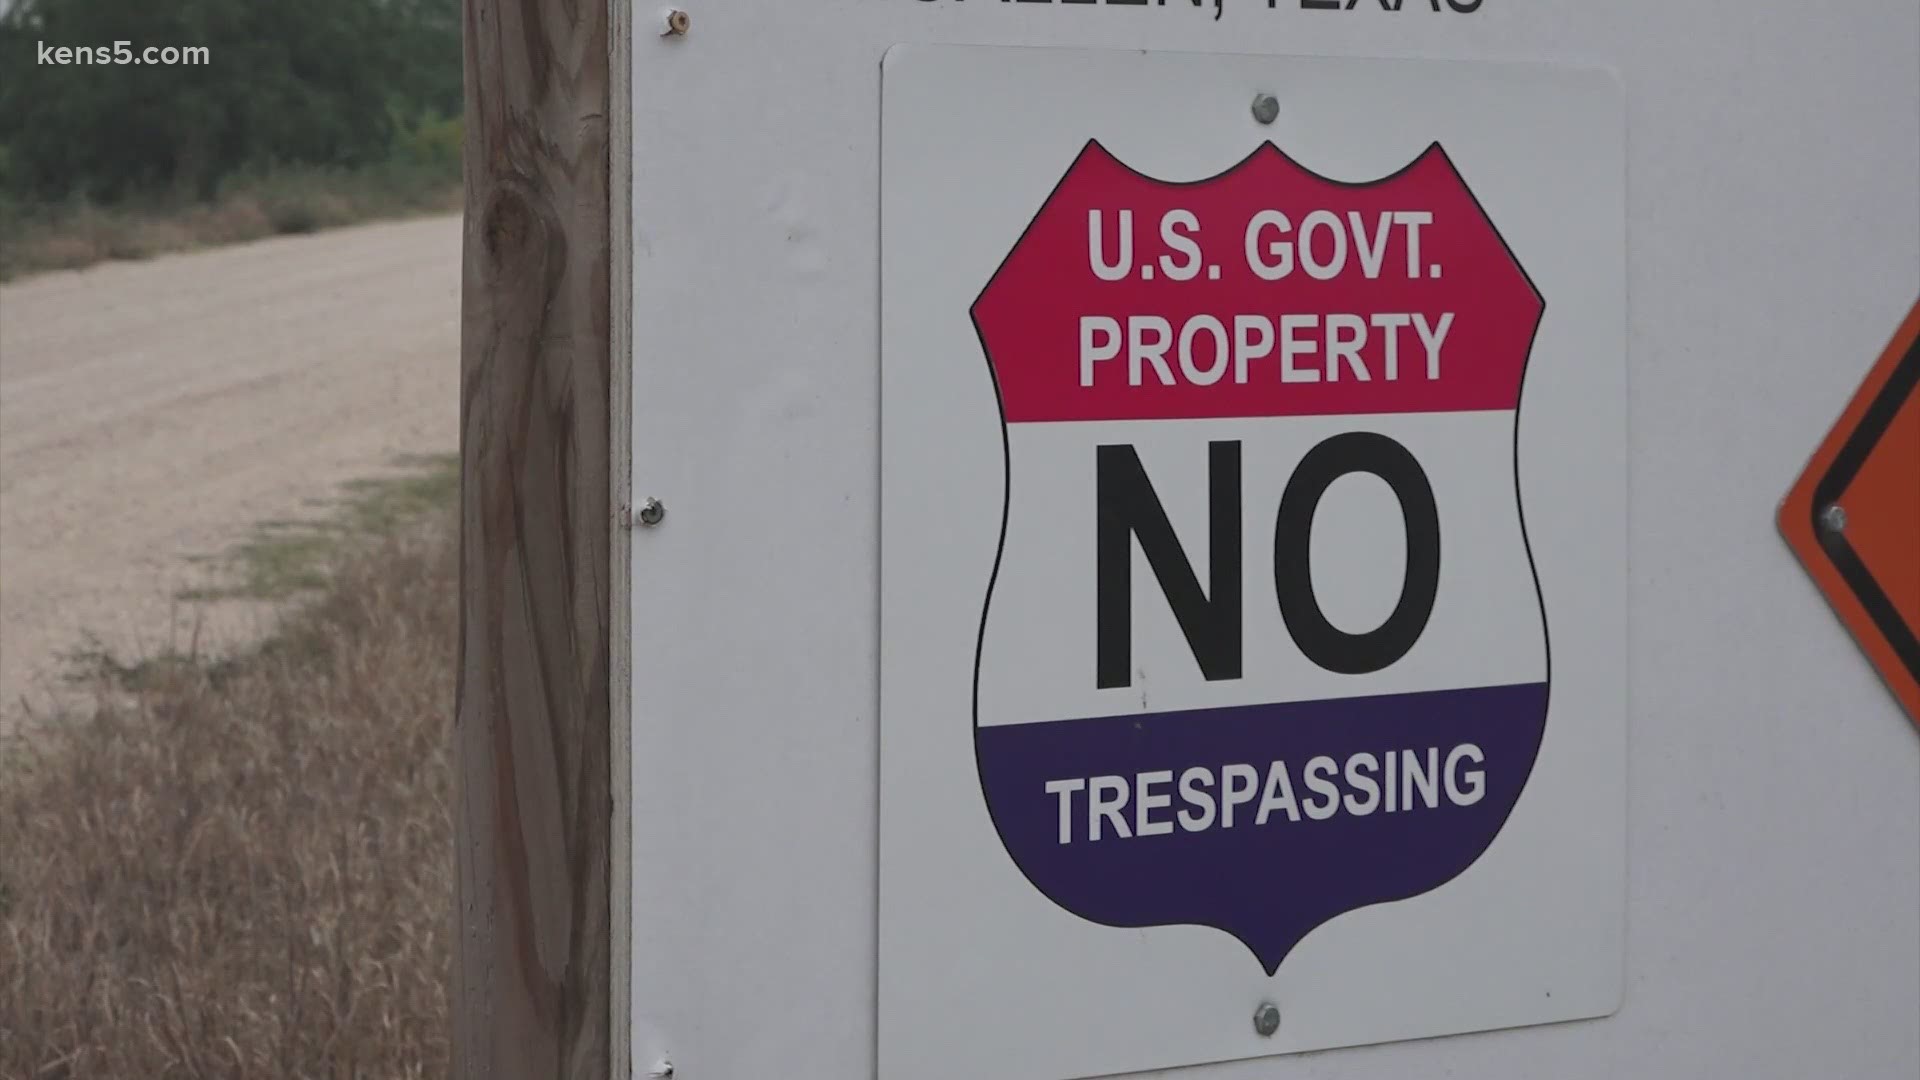 The affected family told KENS 5 this isn't the first time their land has been taken.